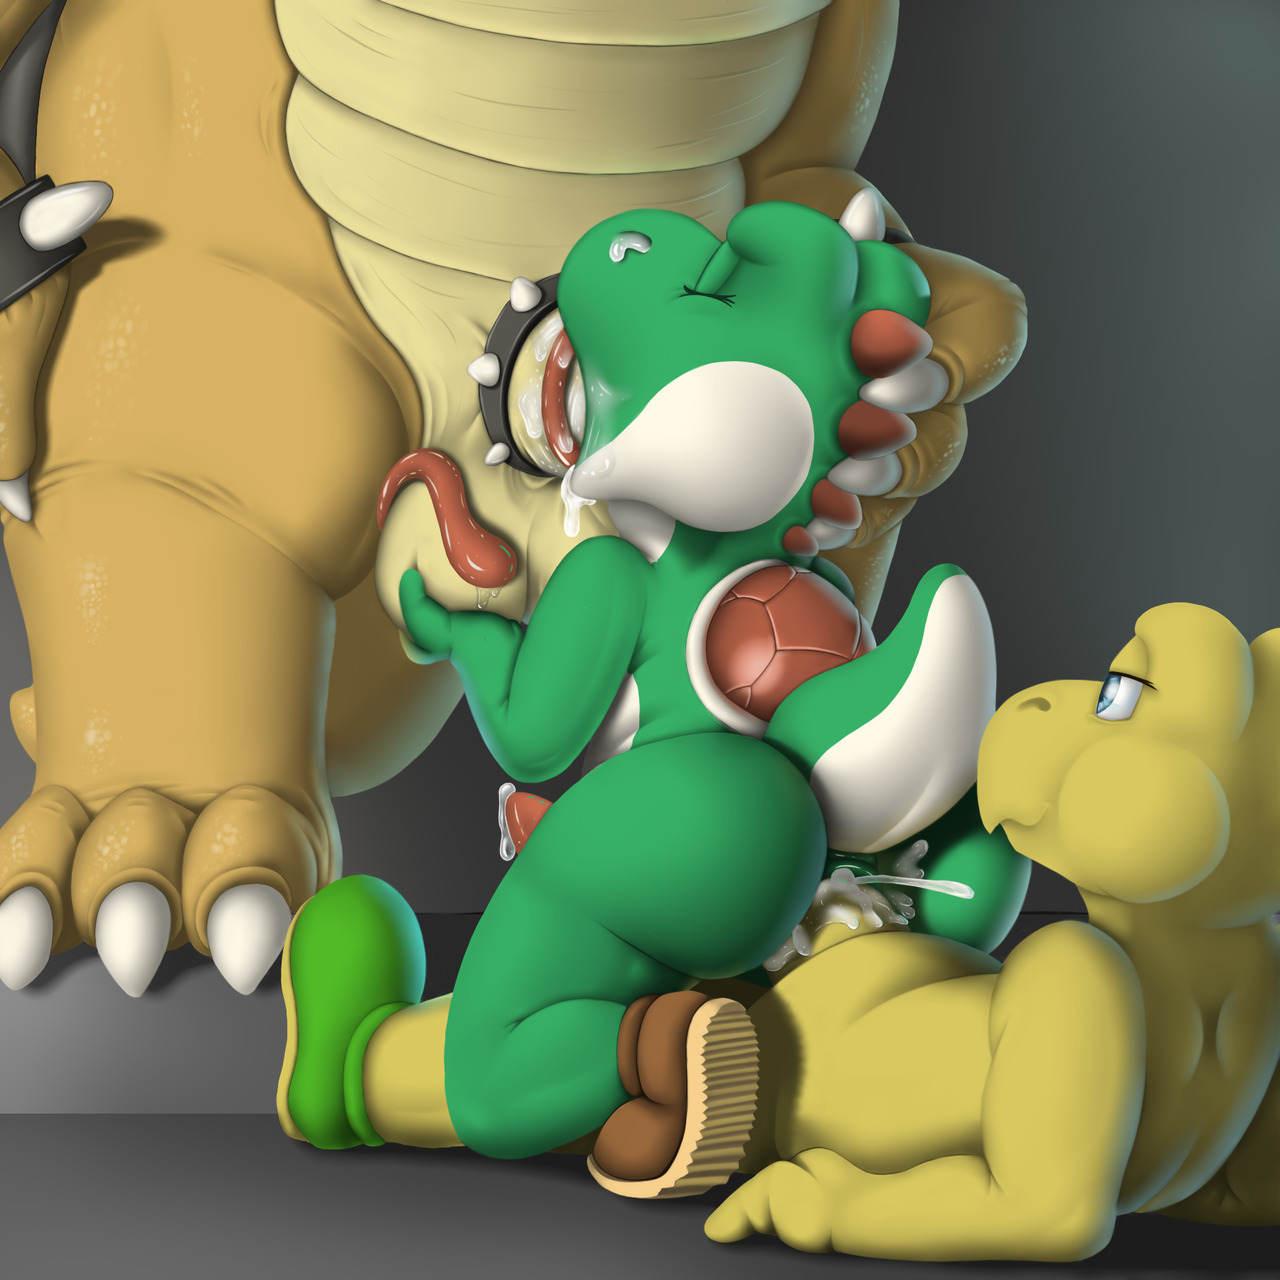 Bowser getting plowed part